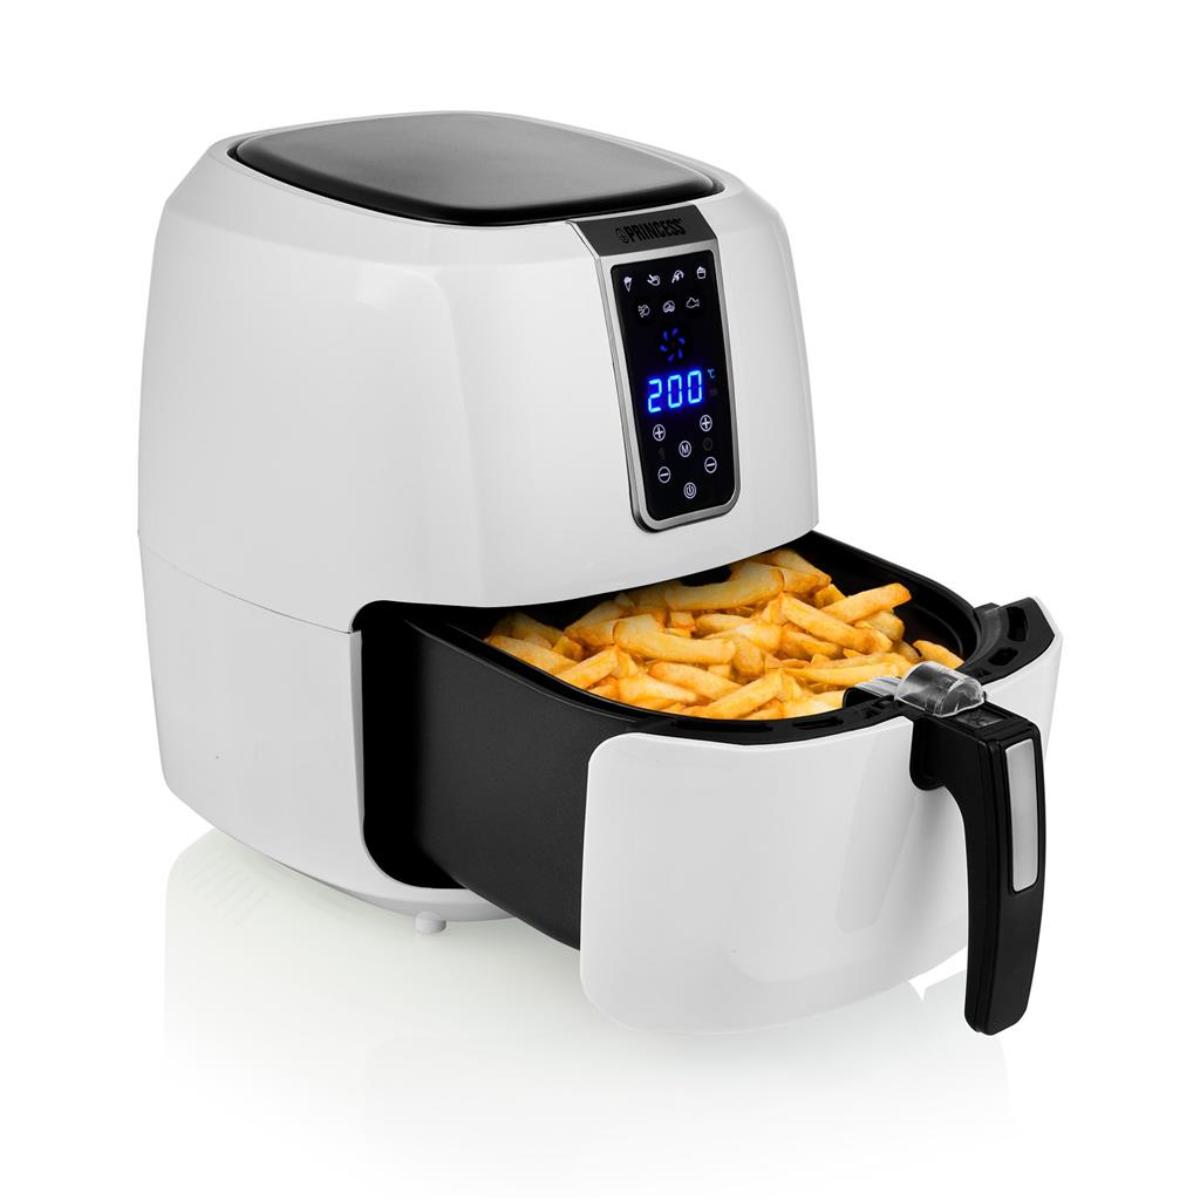 Princess Digital Airfryer XXL Round - 4.5 L Volume - 66.7% Less Energy  Consumption - Stainless Steel - 10 Preprogrammed Settings - 182026